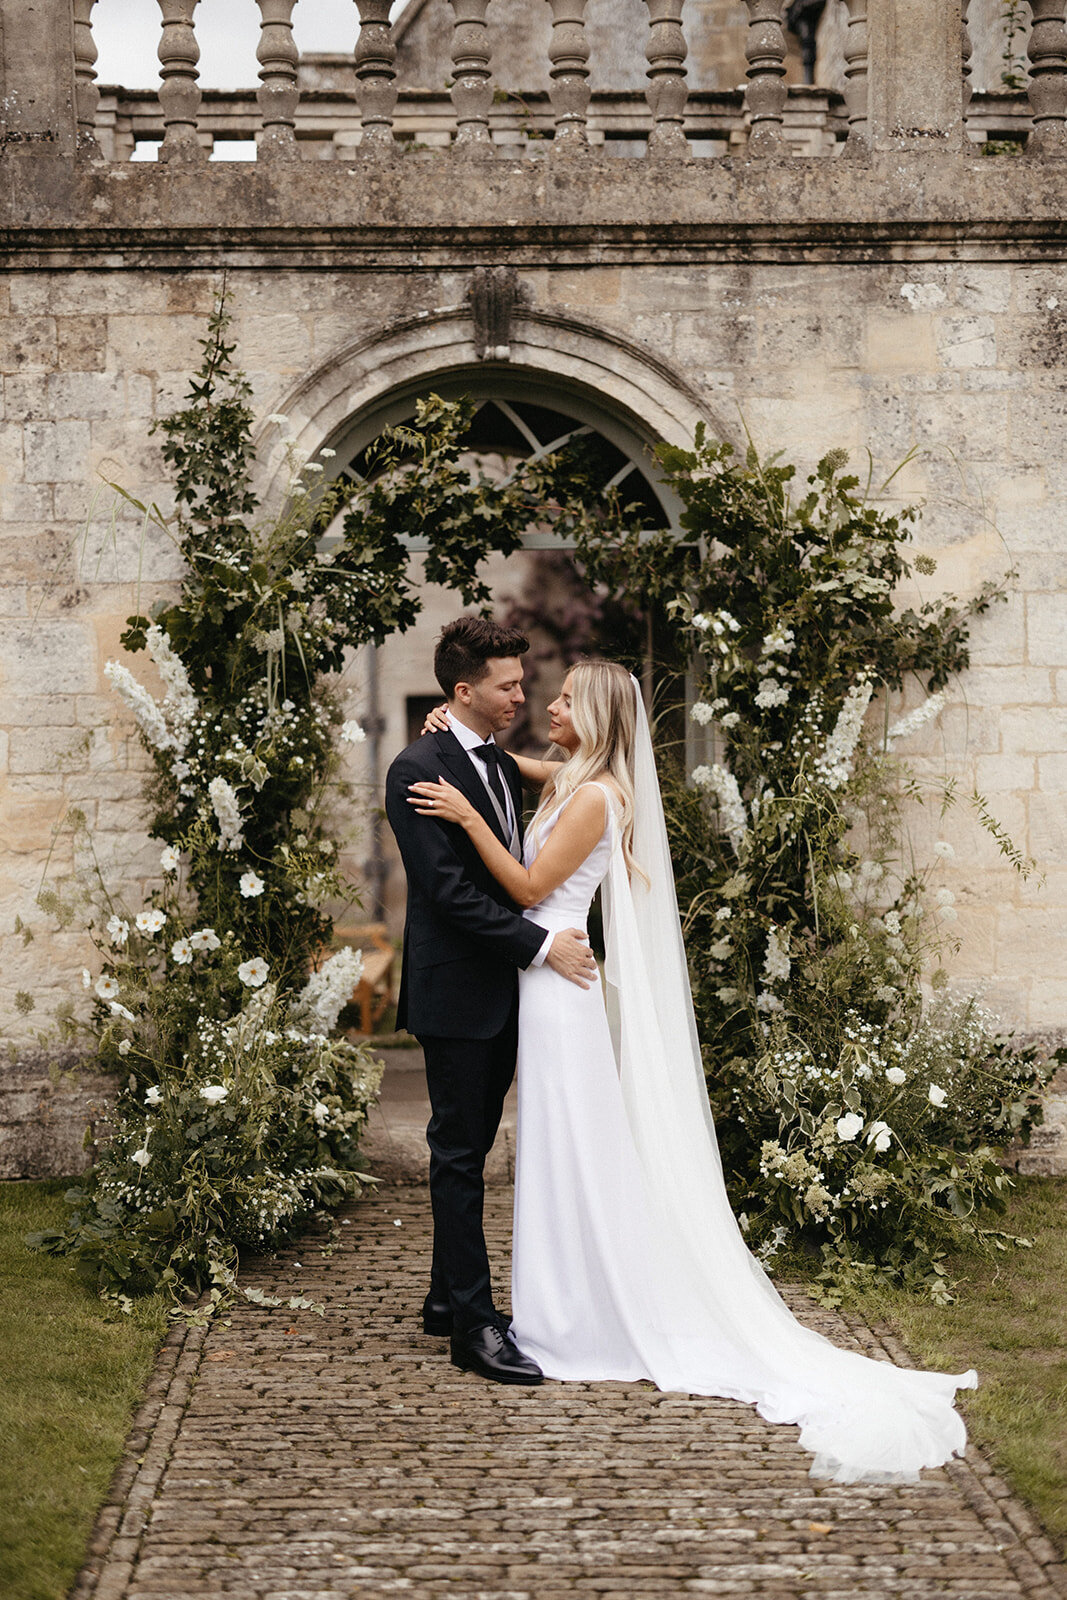 Attabara Studio UK Luxury Wedding Planners Private Estate Marquee Wedding with Rebecca Rees1 Attabara Studio UK Luxury Wedding Planners Private Estate Marquee Wedding with Rebecca Rees79